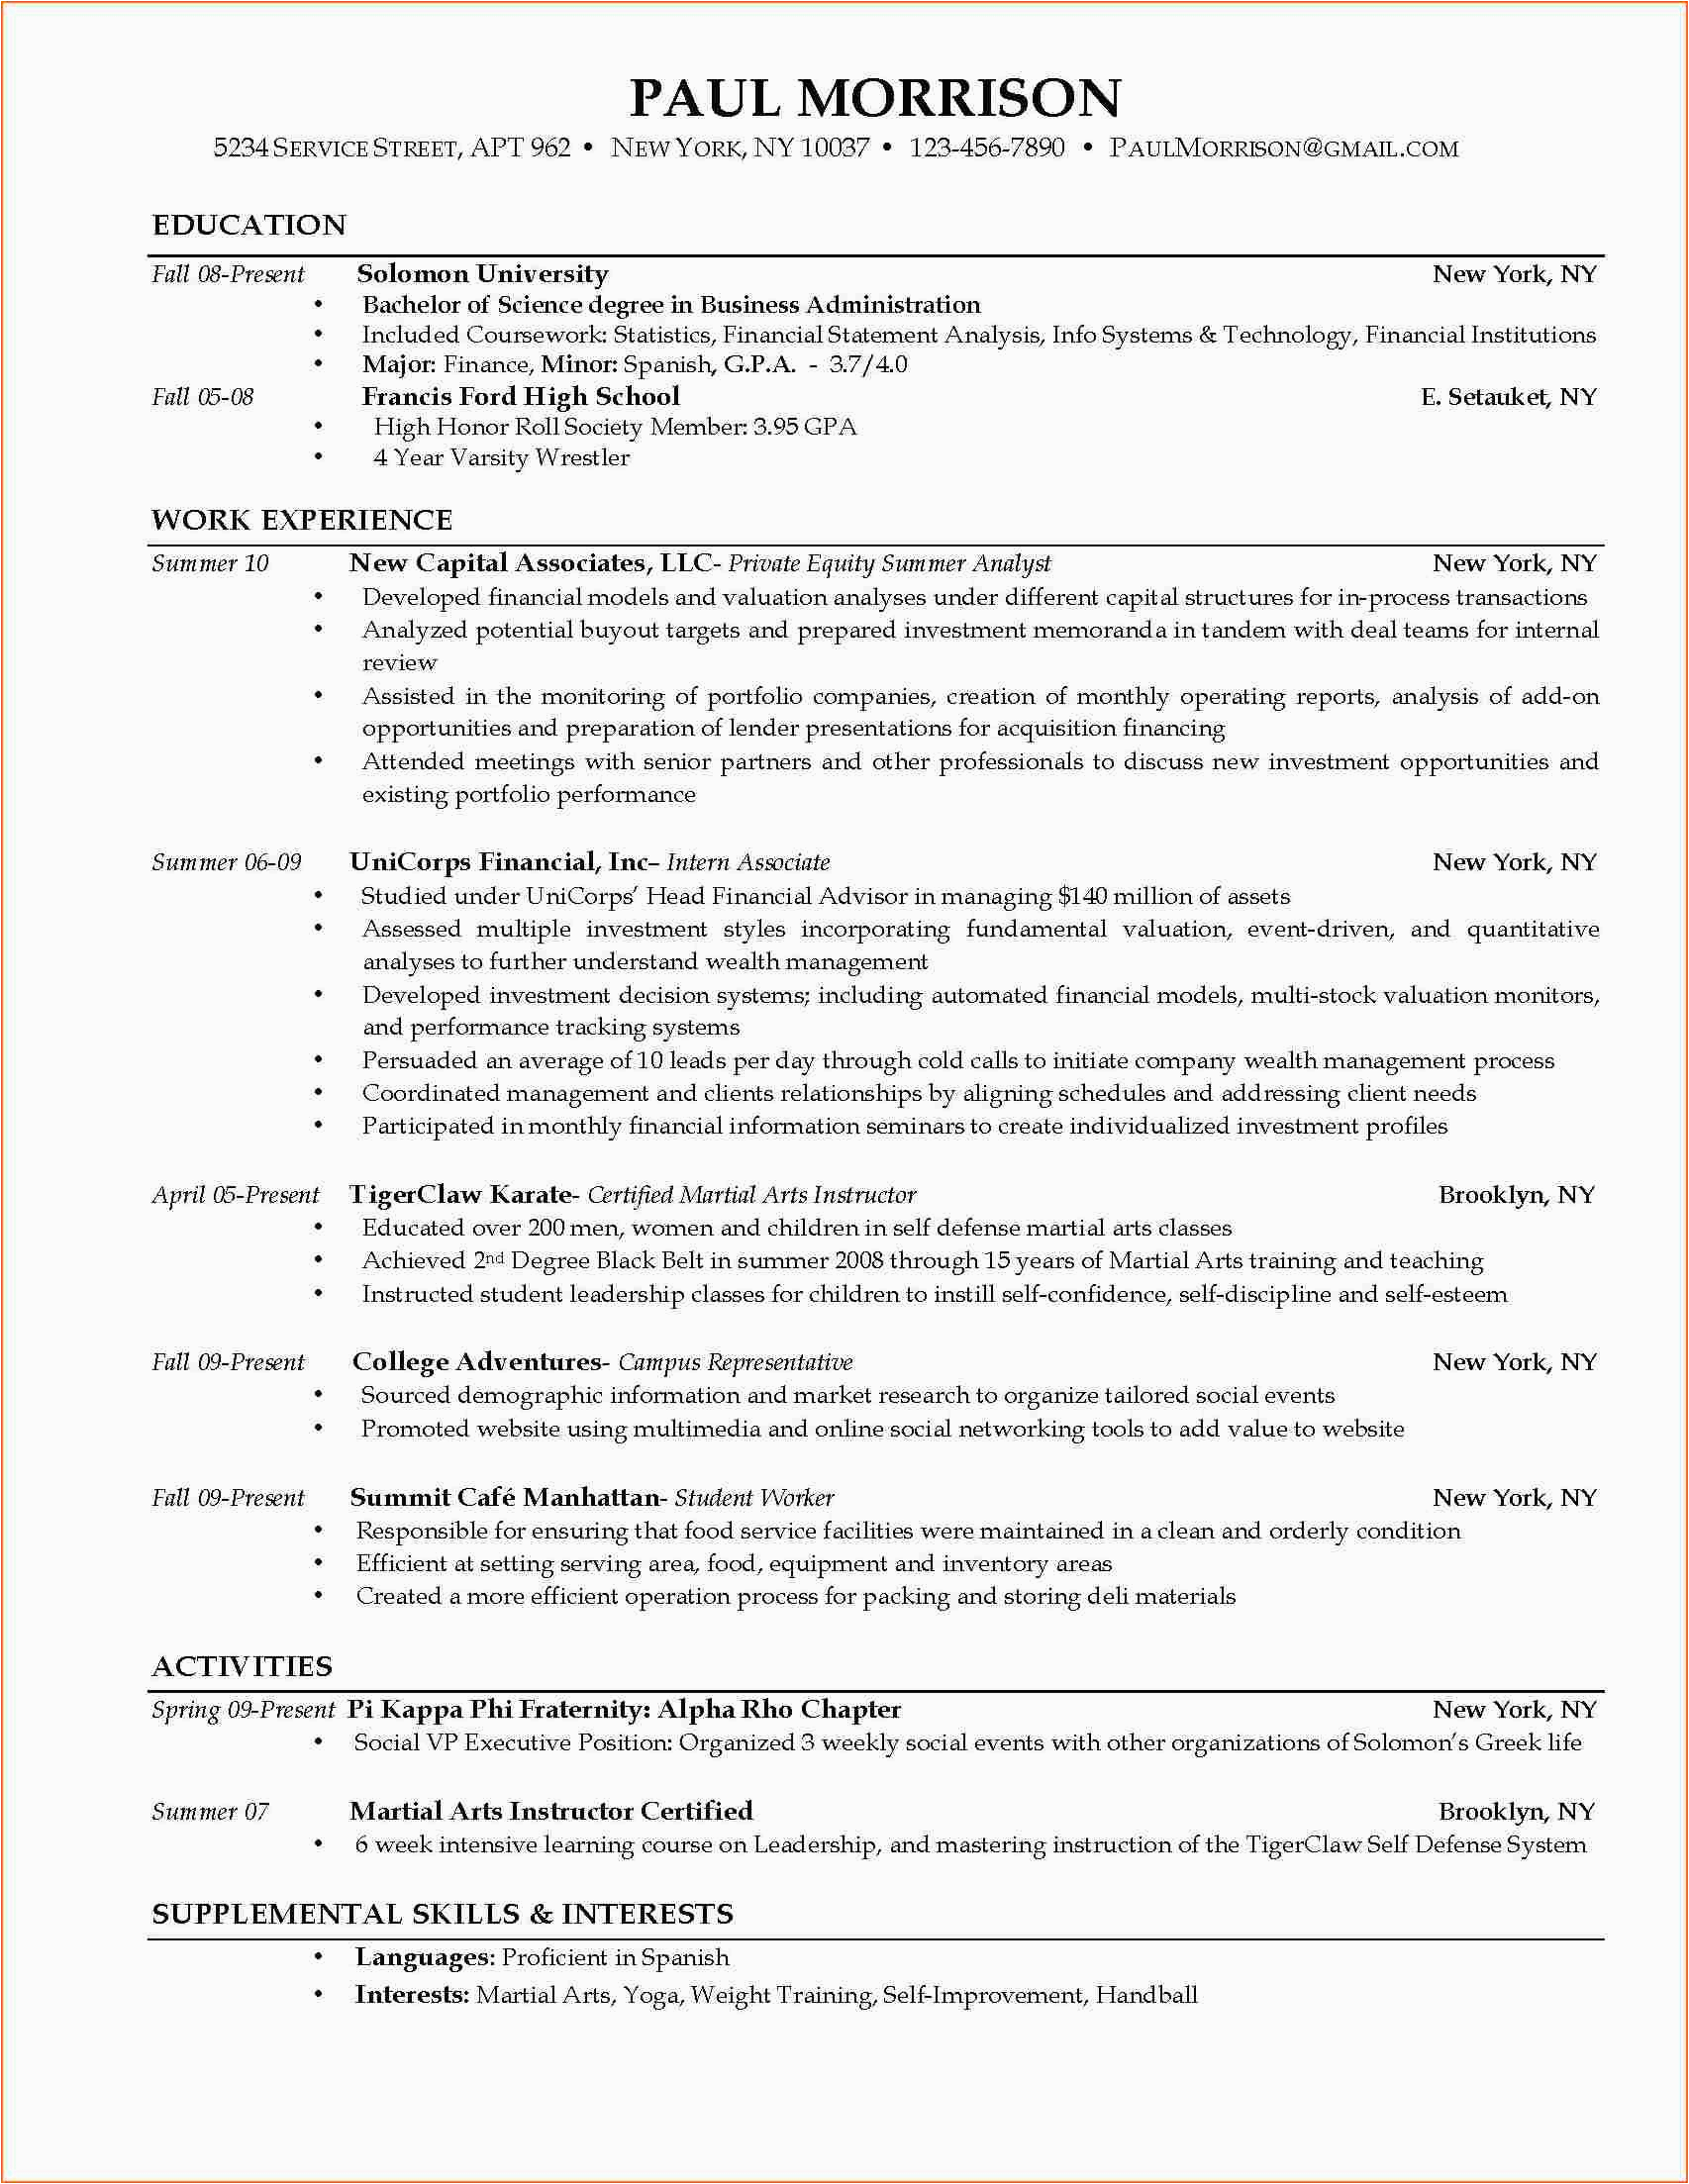 Resume Templates for Graduating College Students Current College Student Resume – Planner Template Free